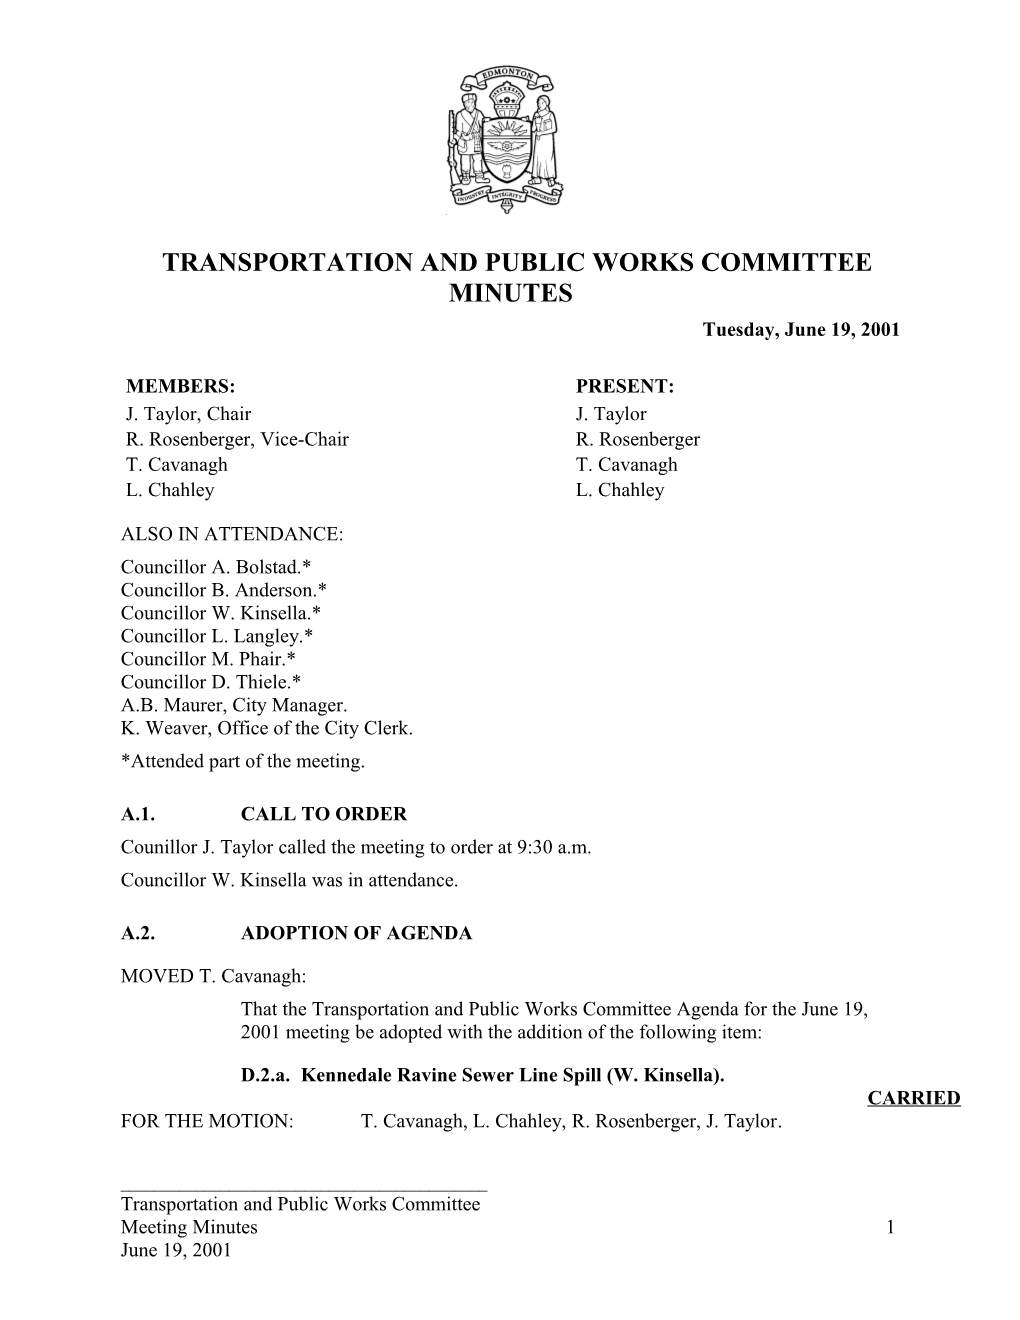 Minutes for Transportation and Public Works Committee June 19, 2001 Meeting